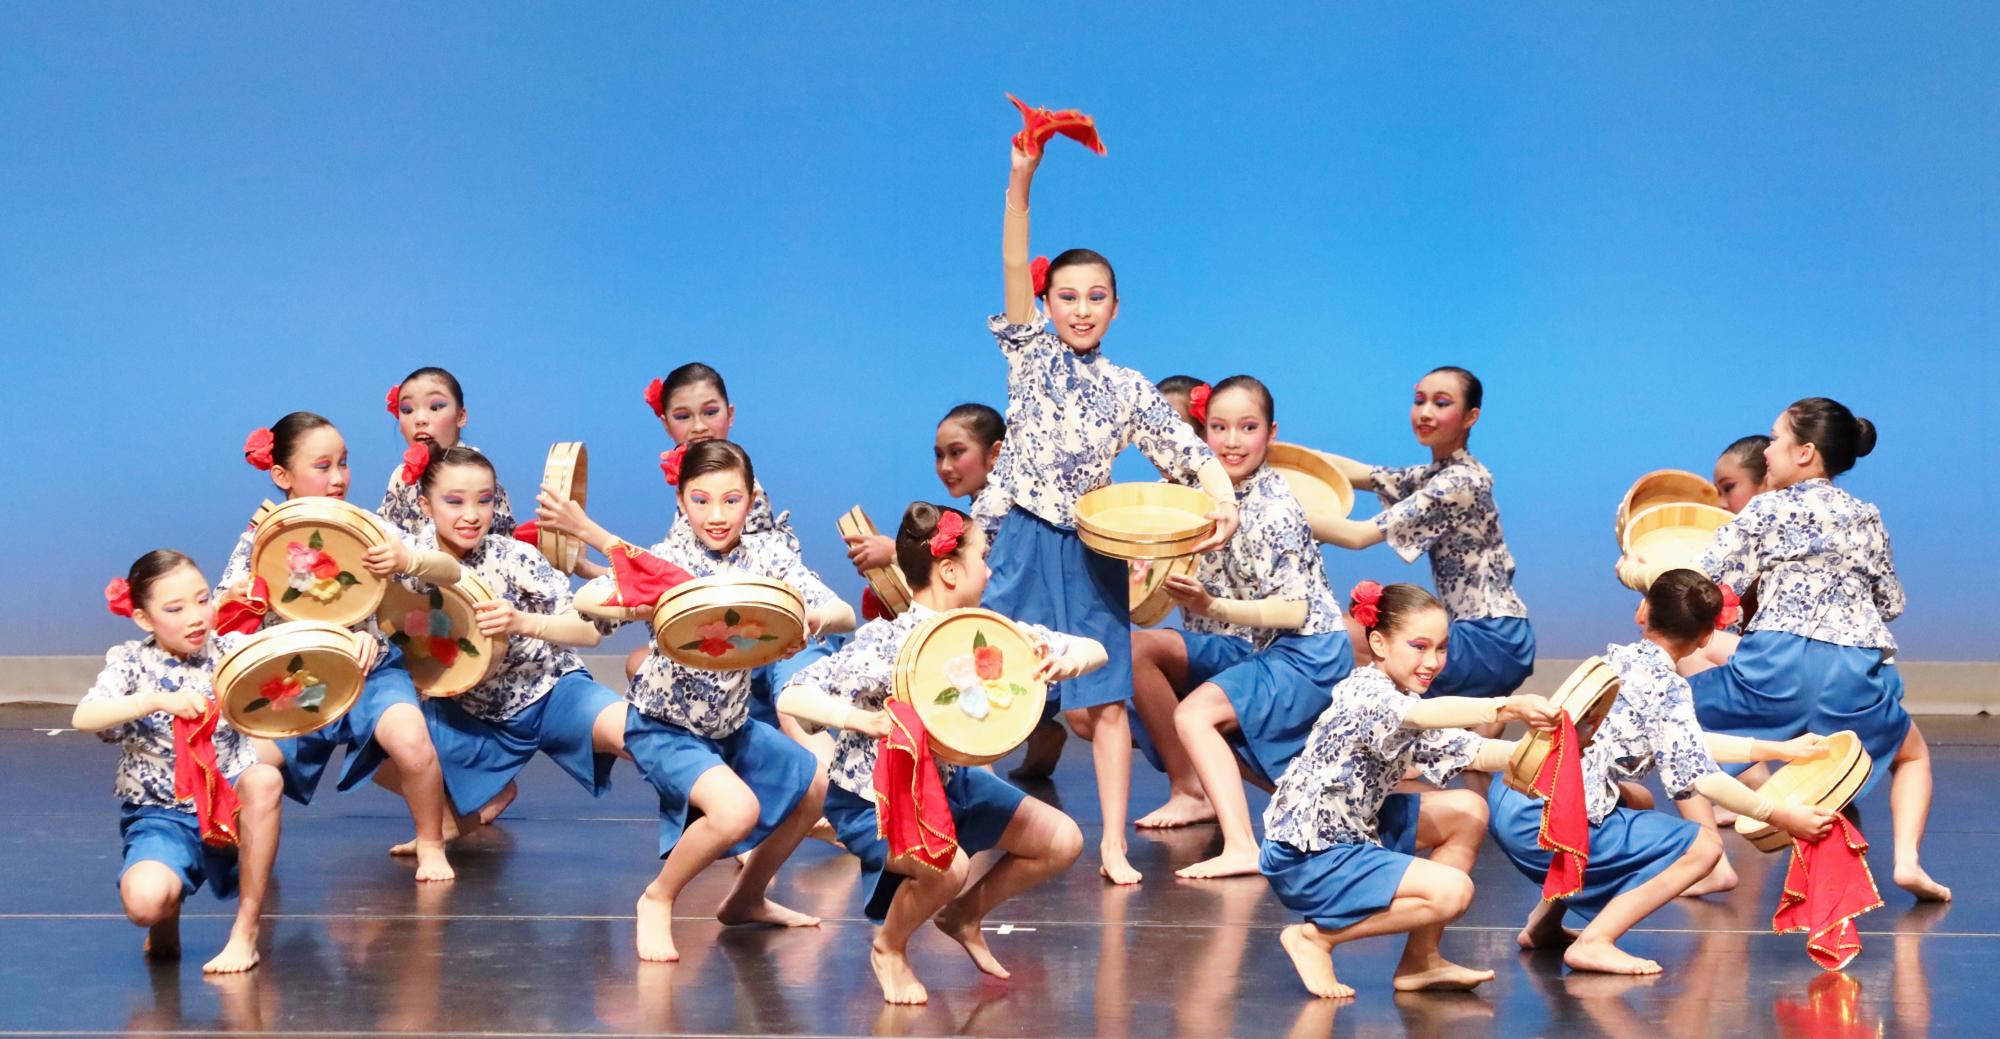 The Senior Chinese Dance Team participated in the 55th Schools Dance Festival Group Dance Competition and won the Honours Award (the Champion).